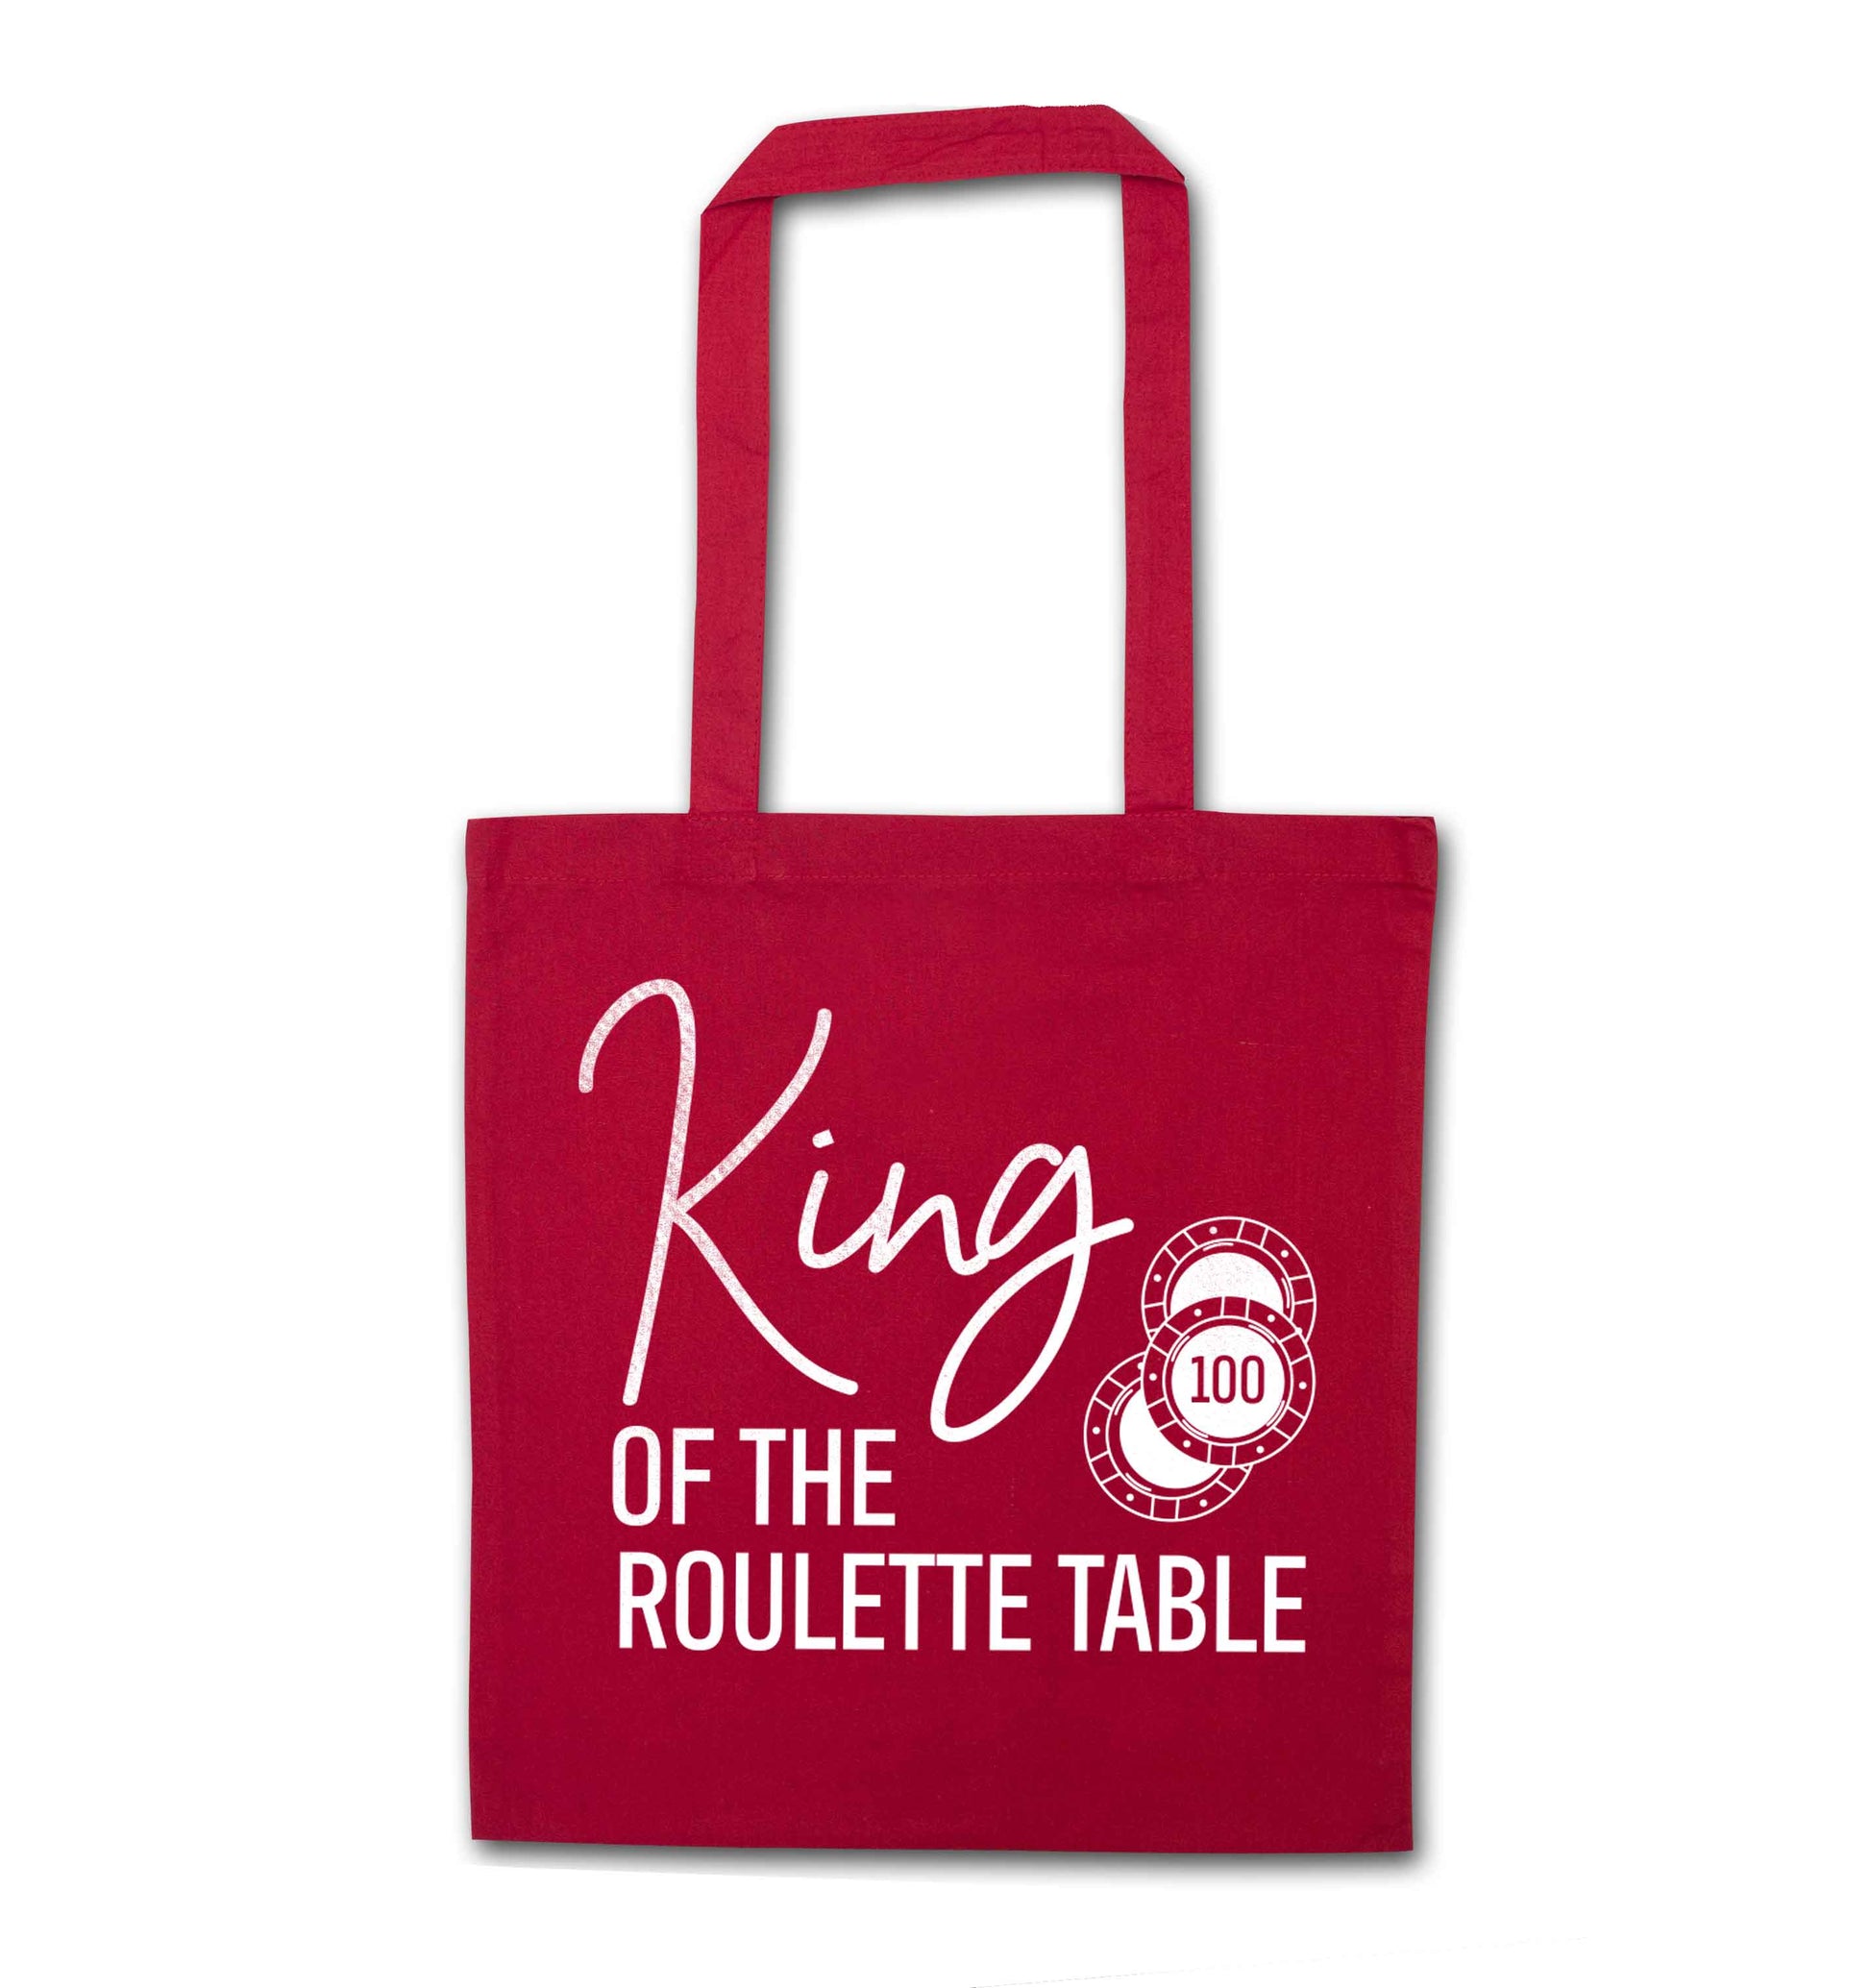 King of the roulette table red tote bag